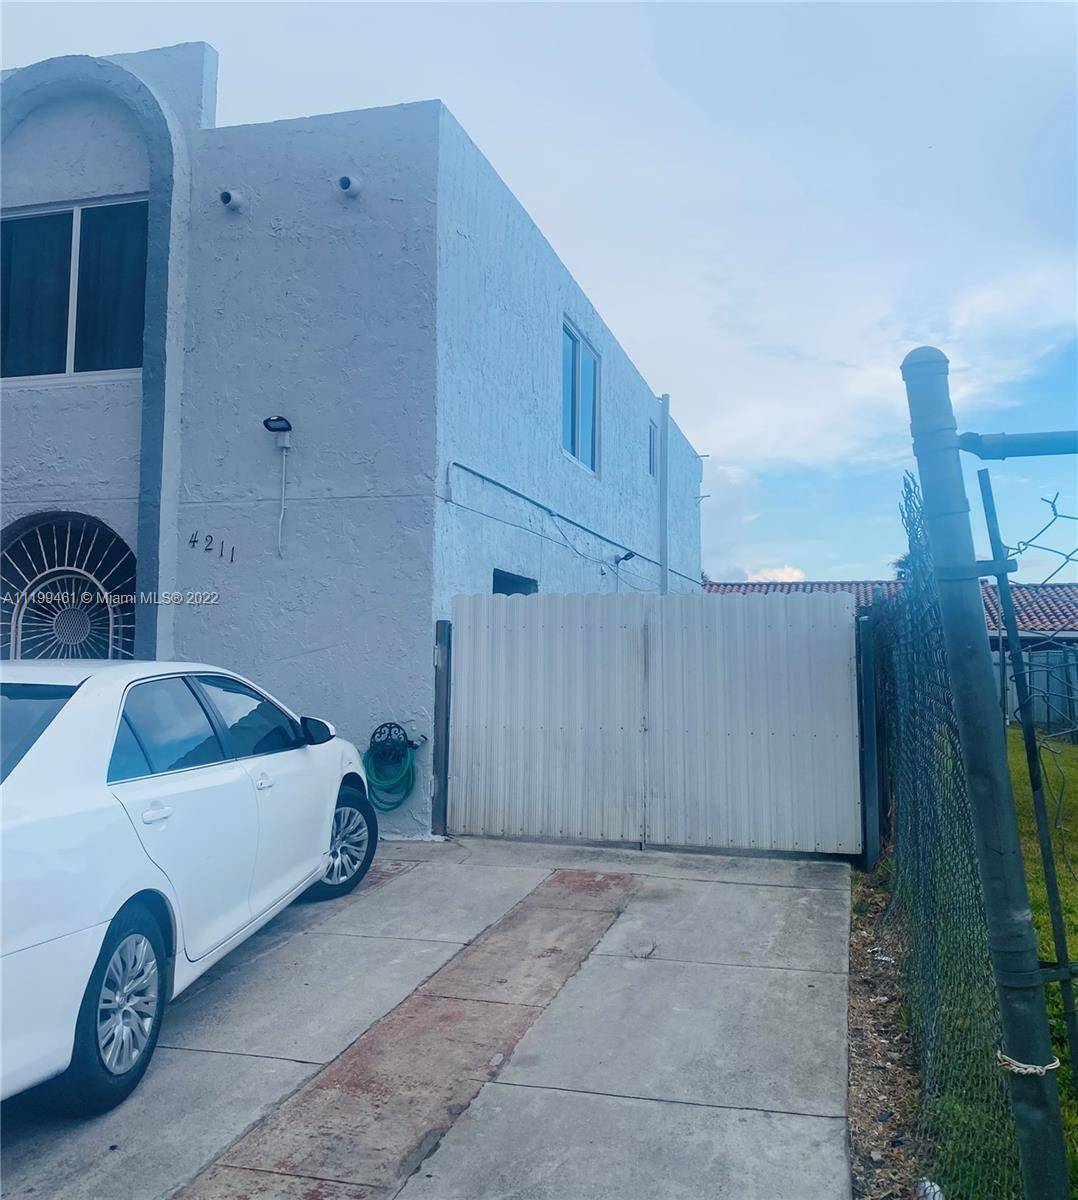 2 STORY TOWNHOUSE, CORNER UNIT ; FEATURES 3 BEDROOMS 1 REMODELED BATHROOM AT 2ND FLOOR, REMODELED 1 2 BATHROOM AT 1ST FLOOR, COVERED ALUMINIUM PATIO, 3 CAR SPACES AT FRONT ...